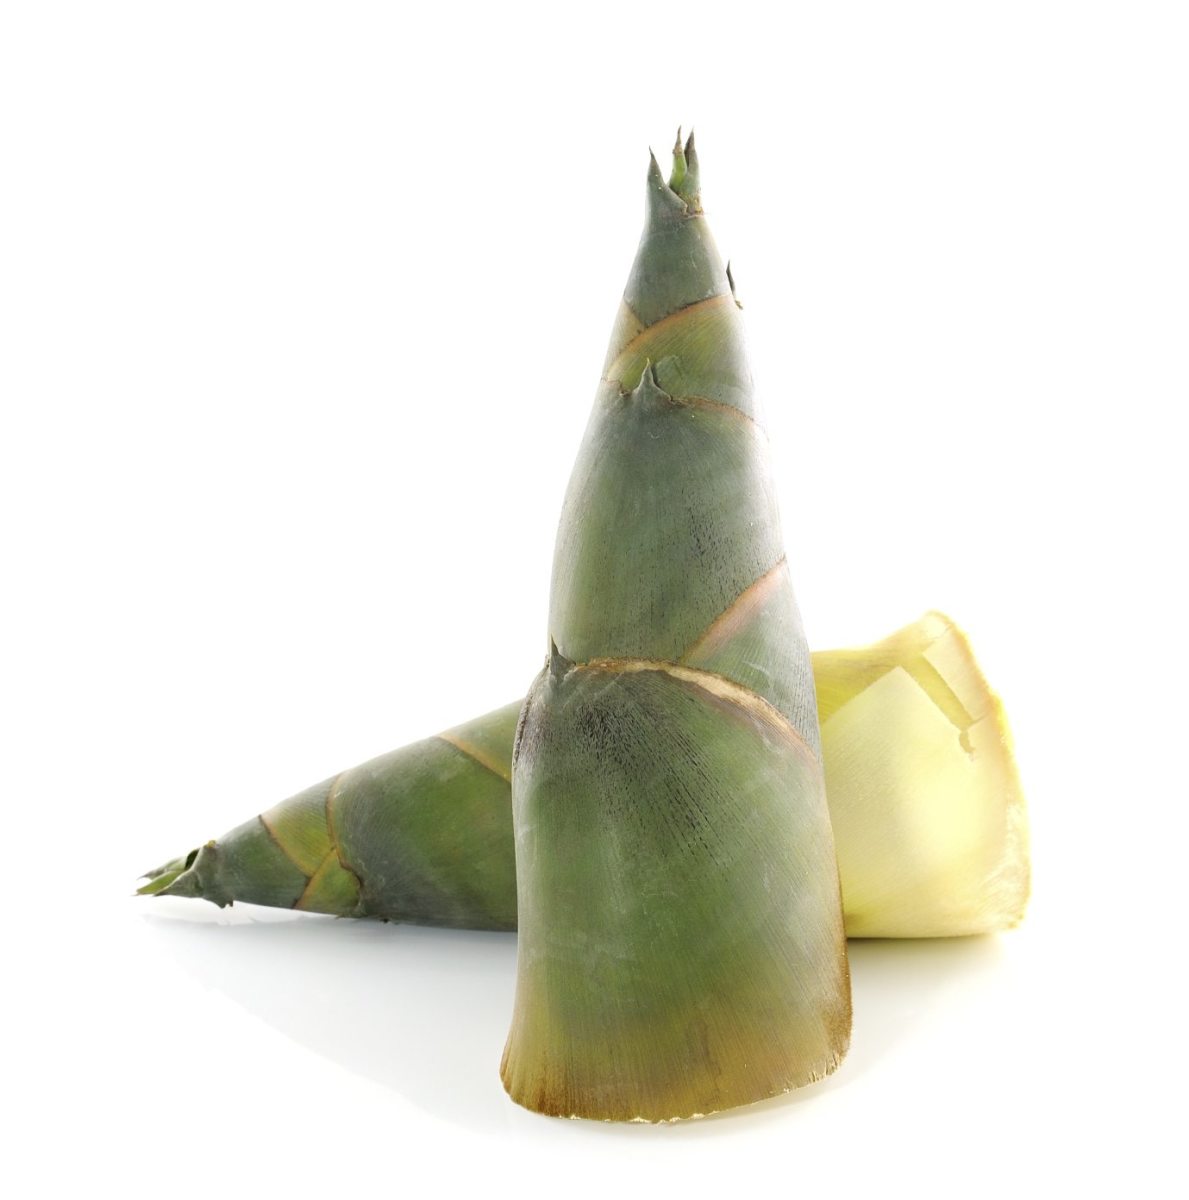 This is what young bamboo shoots look like.